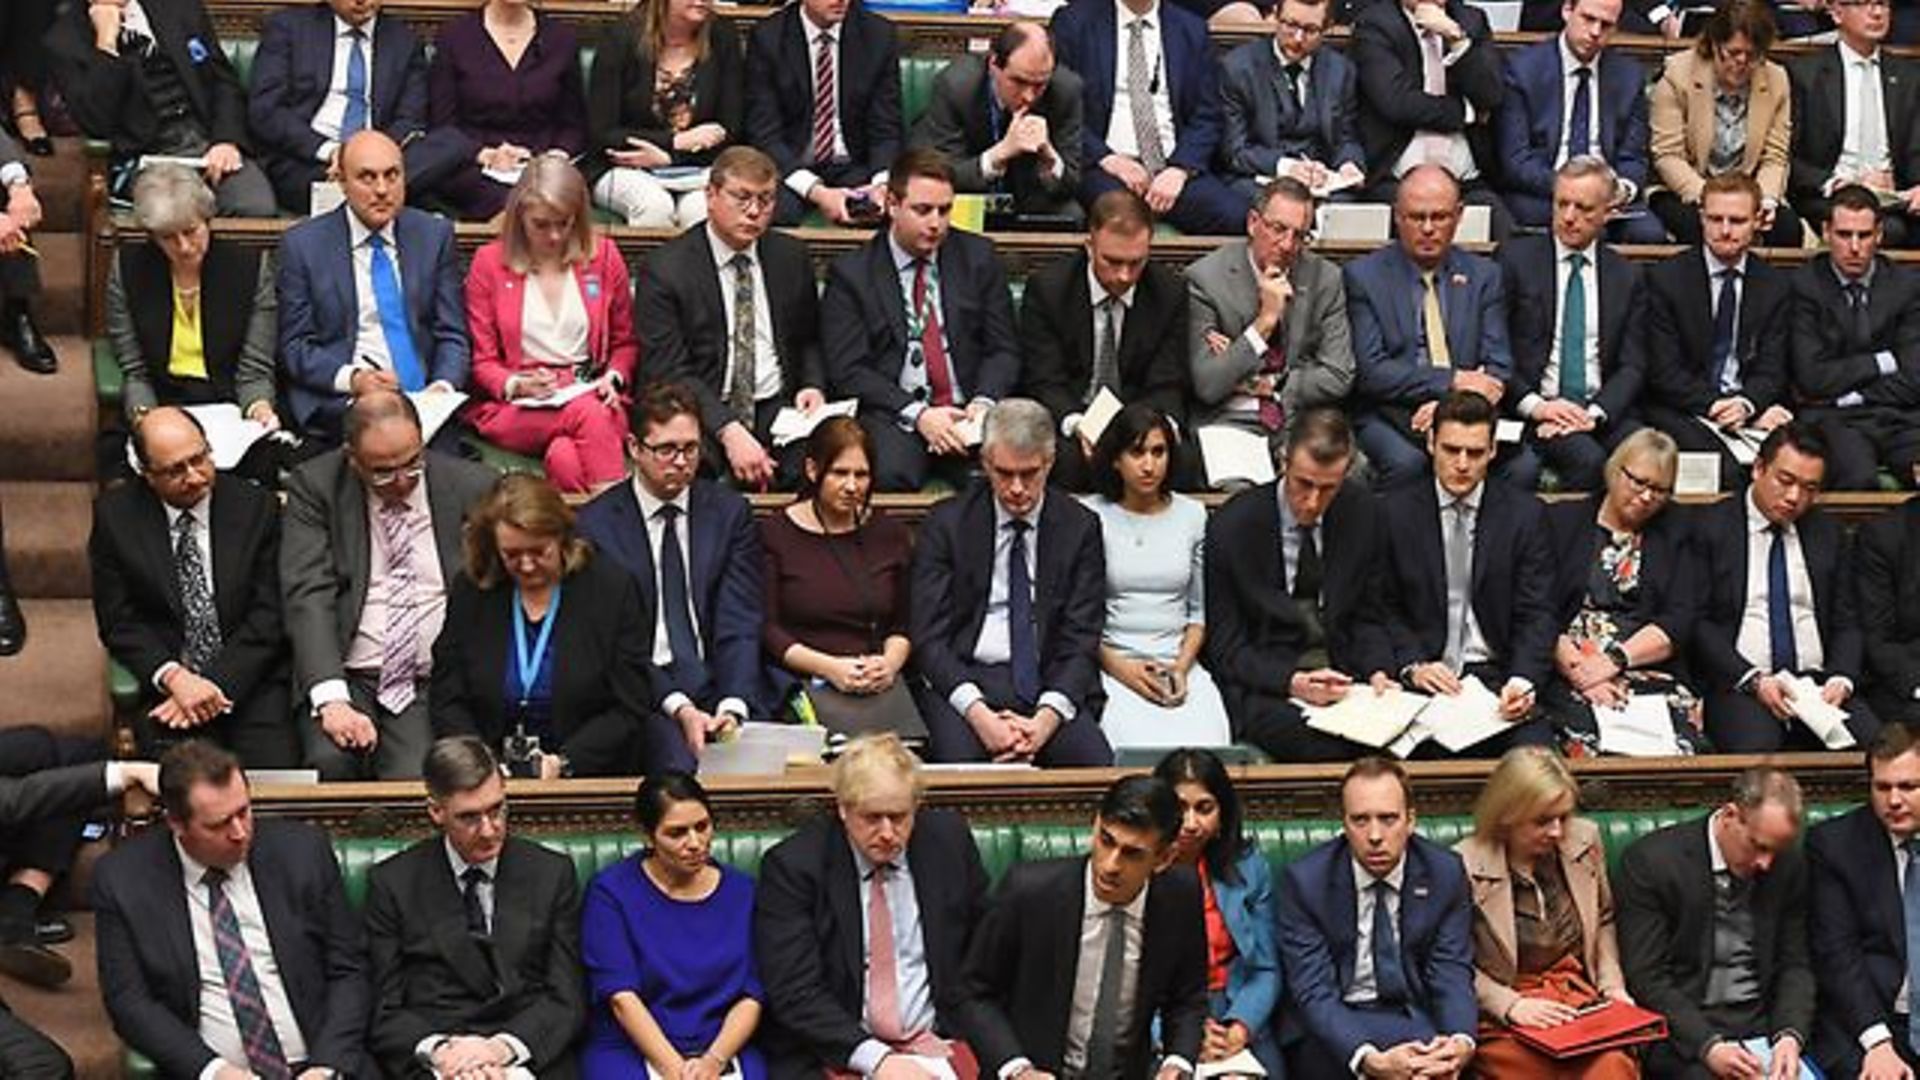 Tory MPs in the House of Commons on Budget Day - Credit: Jessica Taylor